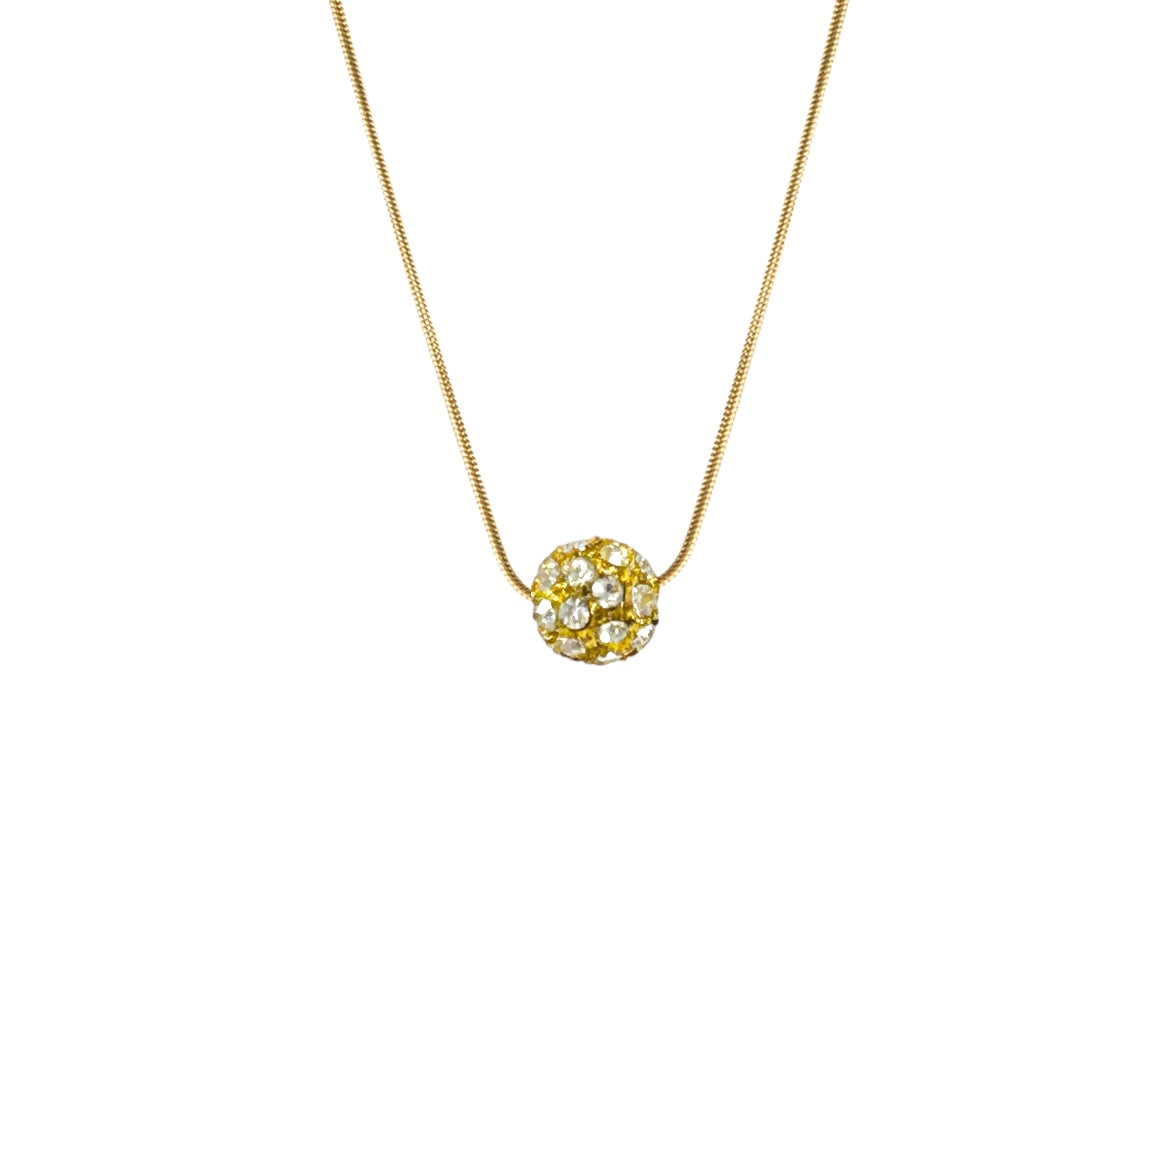 Kenzie Necklace - White with Gold